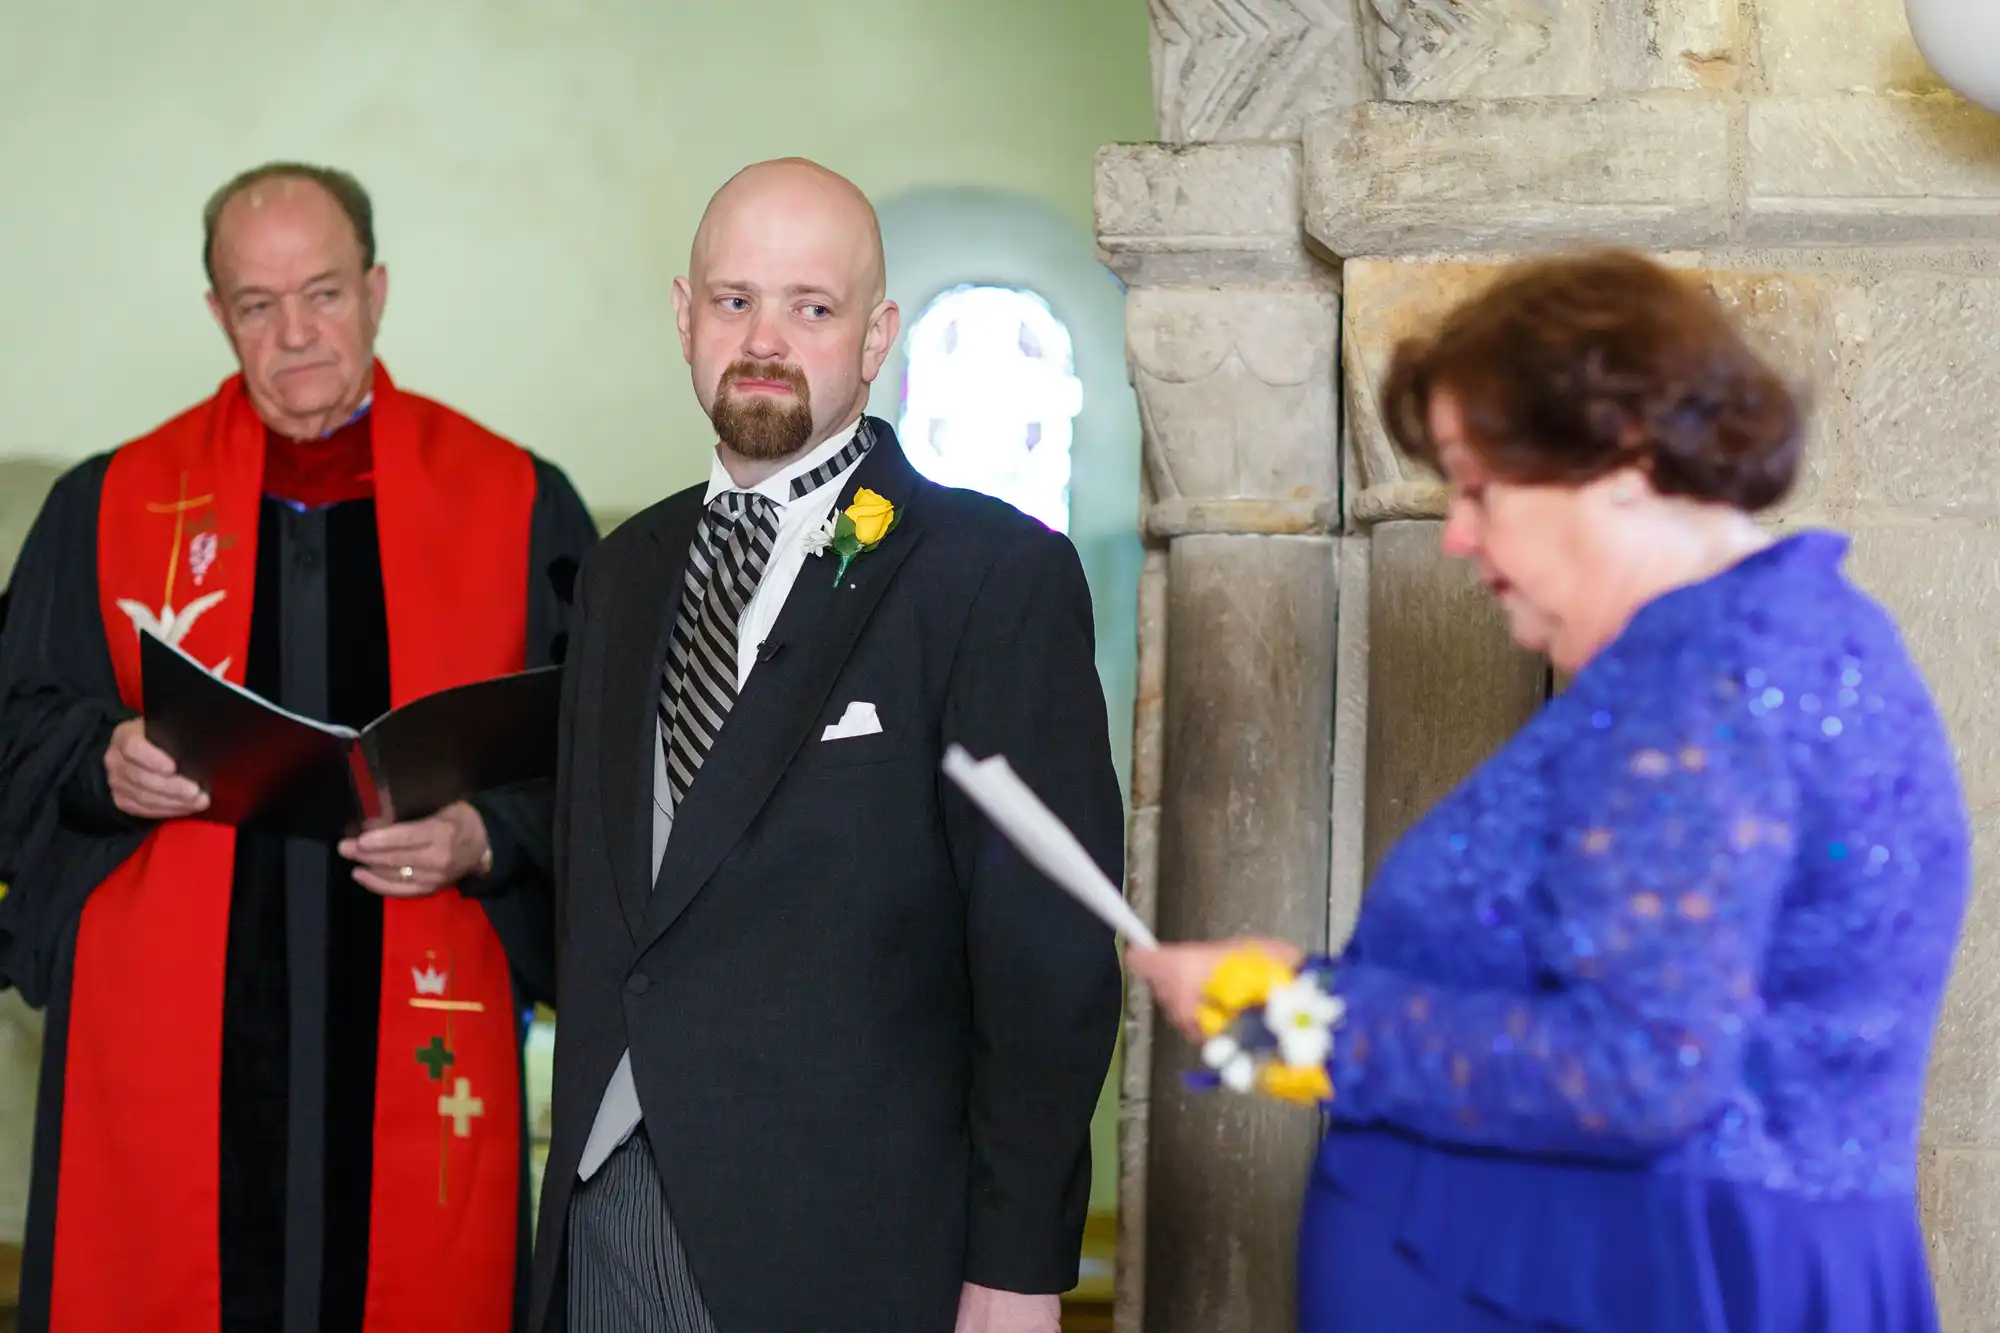 A groom stands with a priest and a woman, all holding papers in a church, during a wedding ceremony.